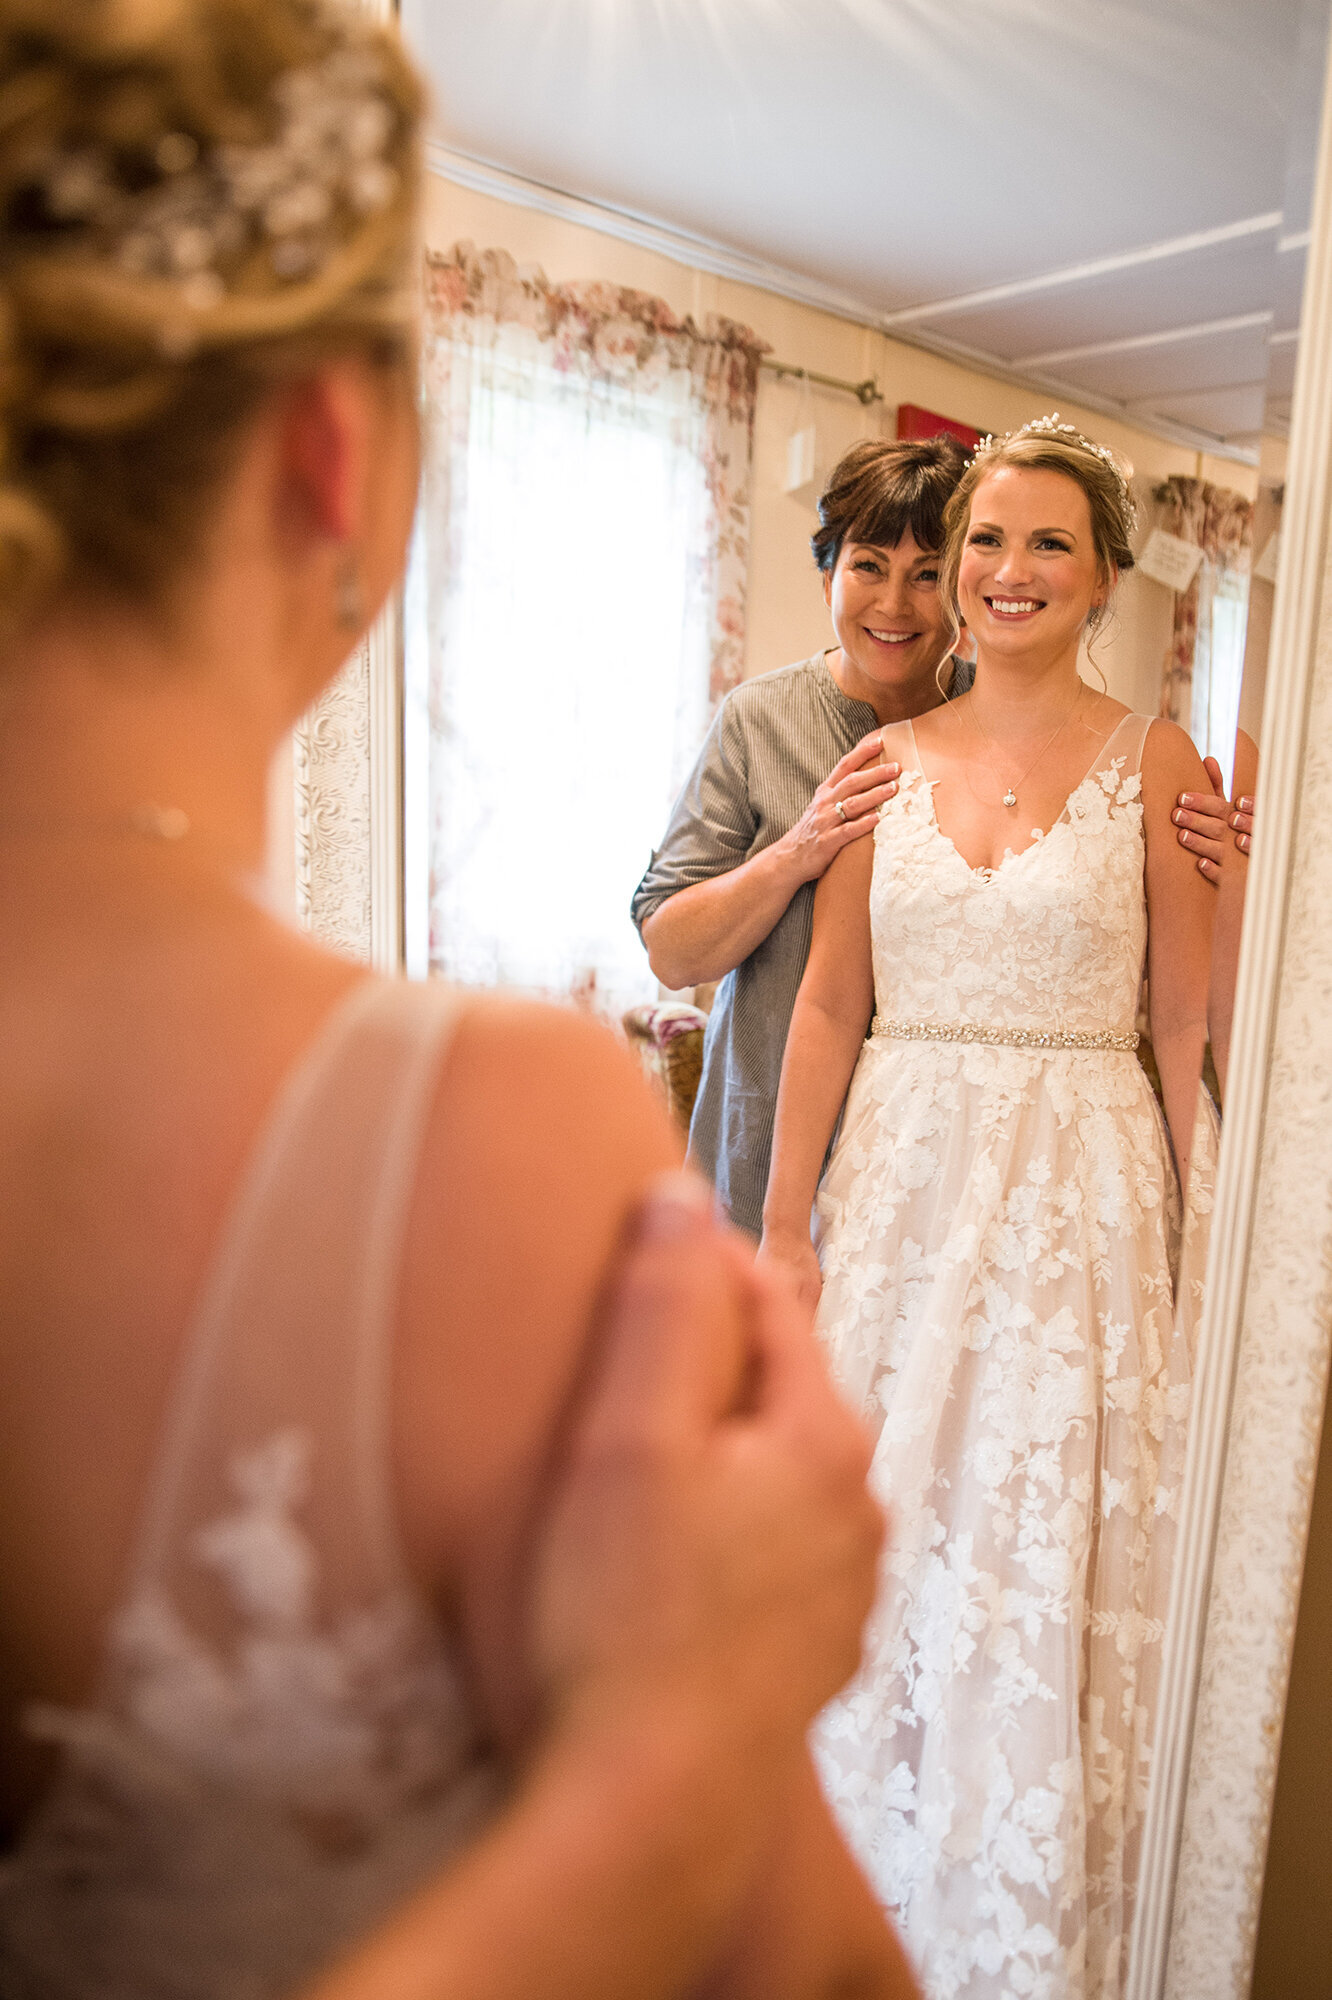 Bride and mom smiling in mirror on wedding day.